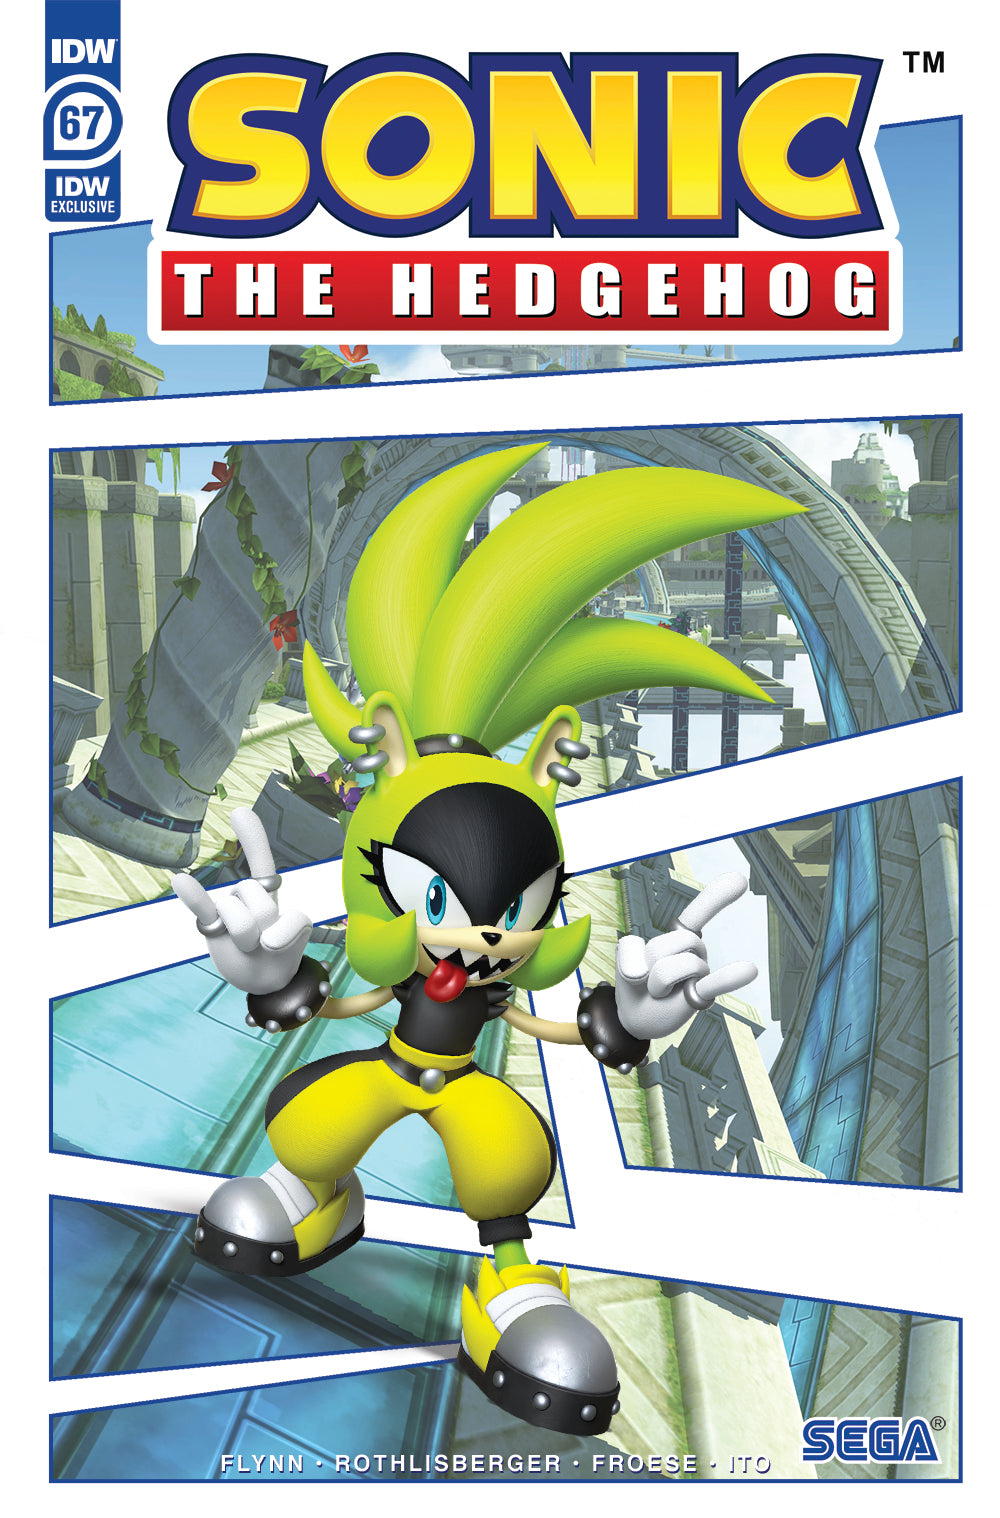 Sonic the Hedgehog #67 - 2023 IDW Exclusive